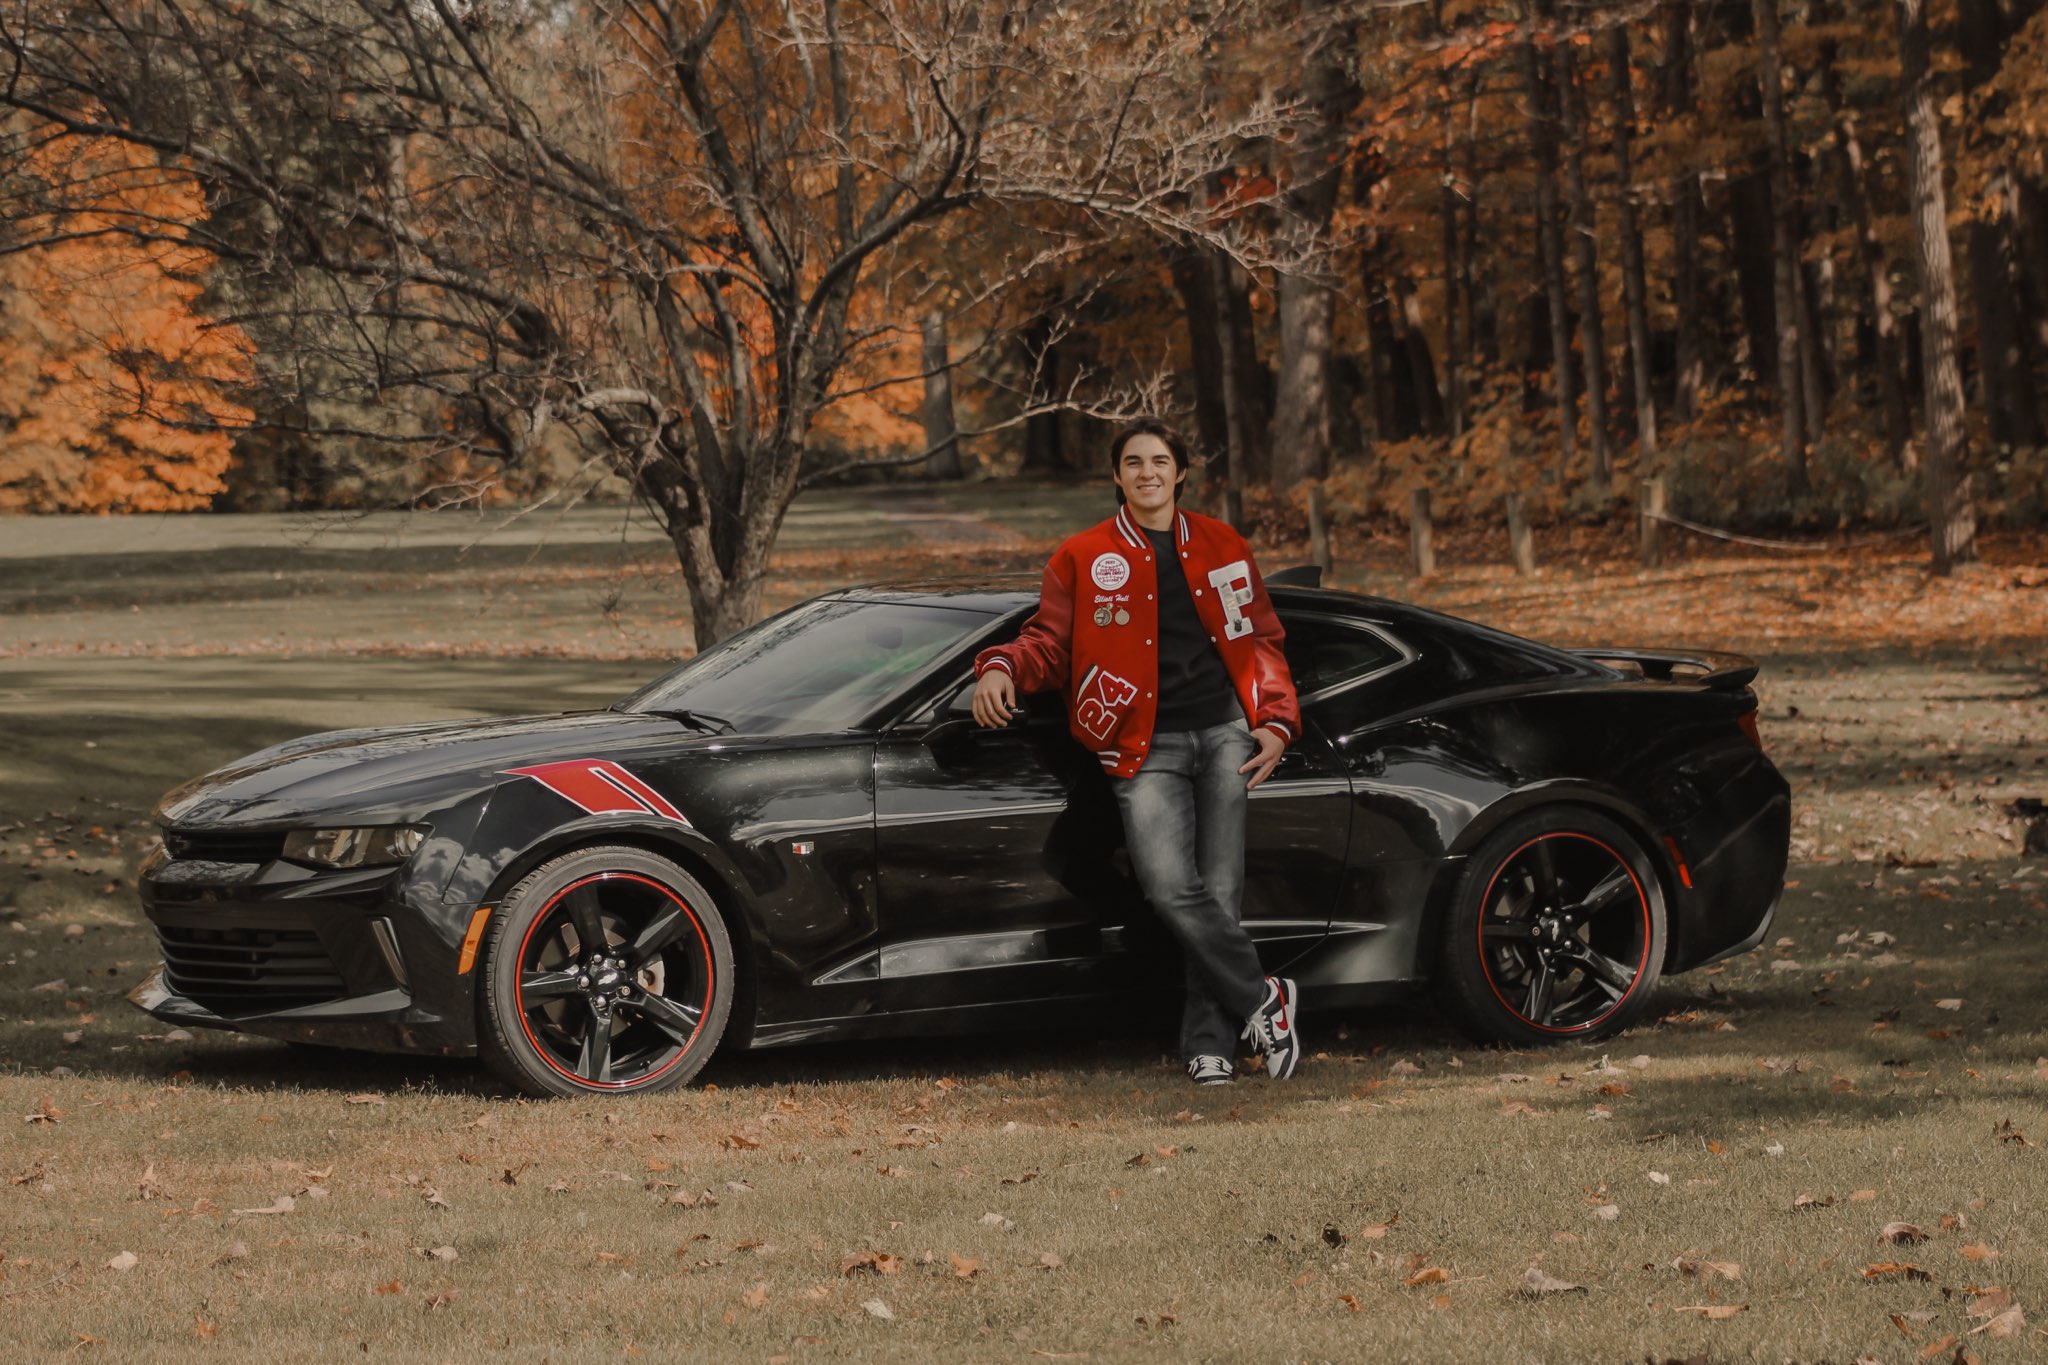 A man in a red jacket standing next to a black car.